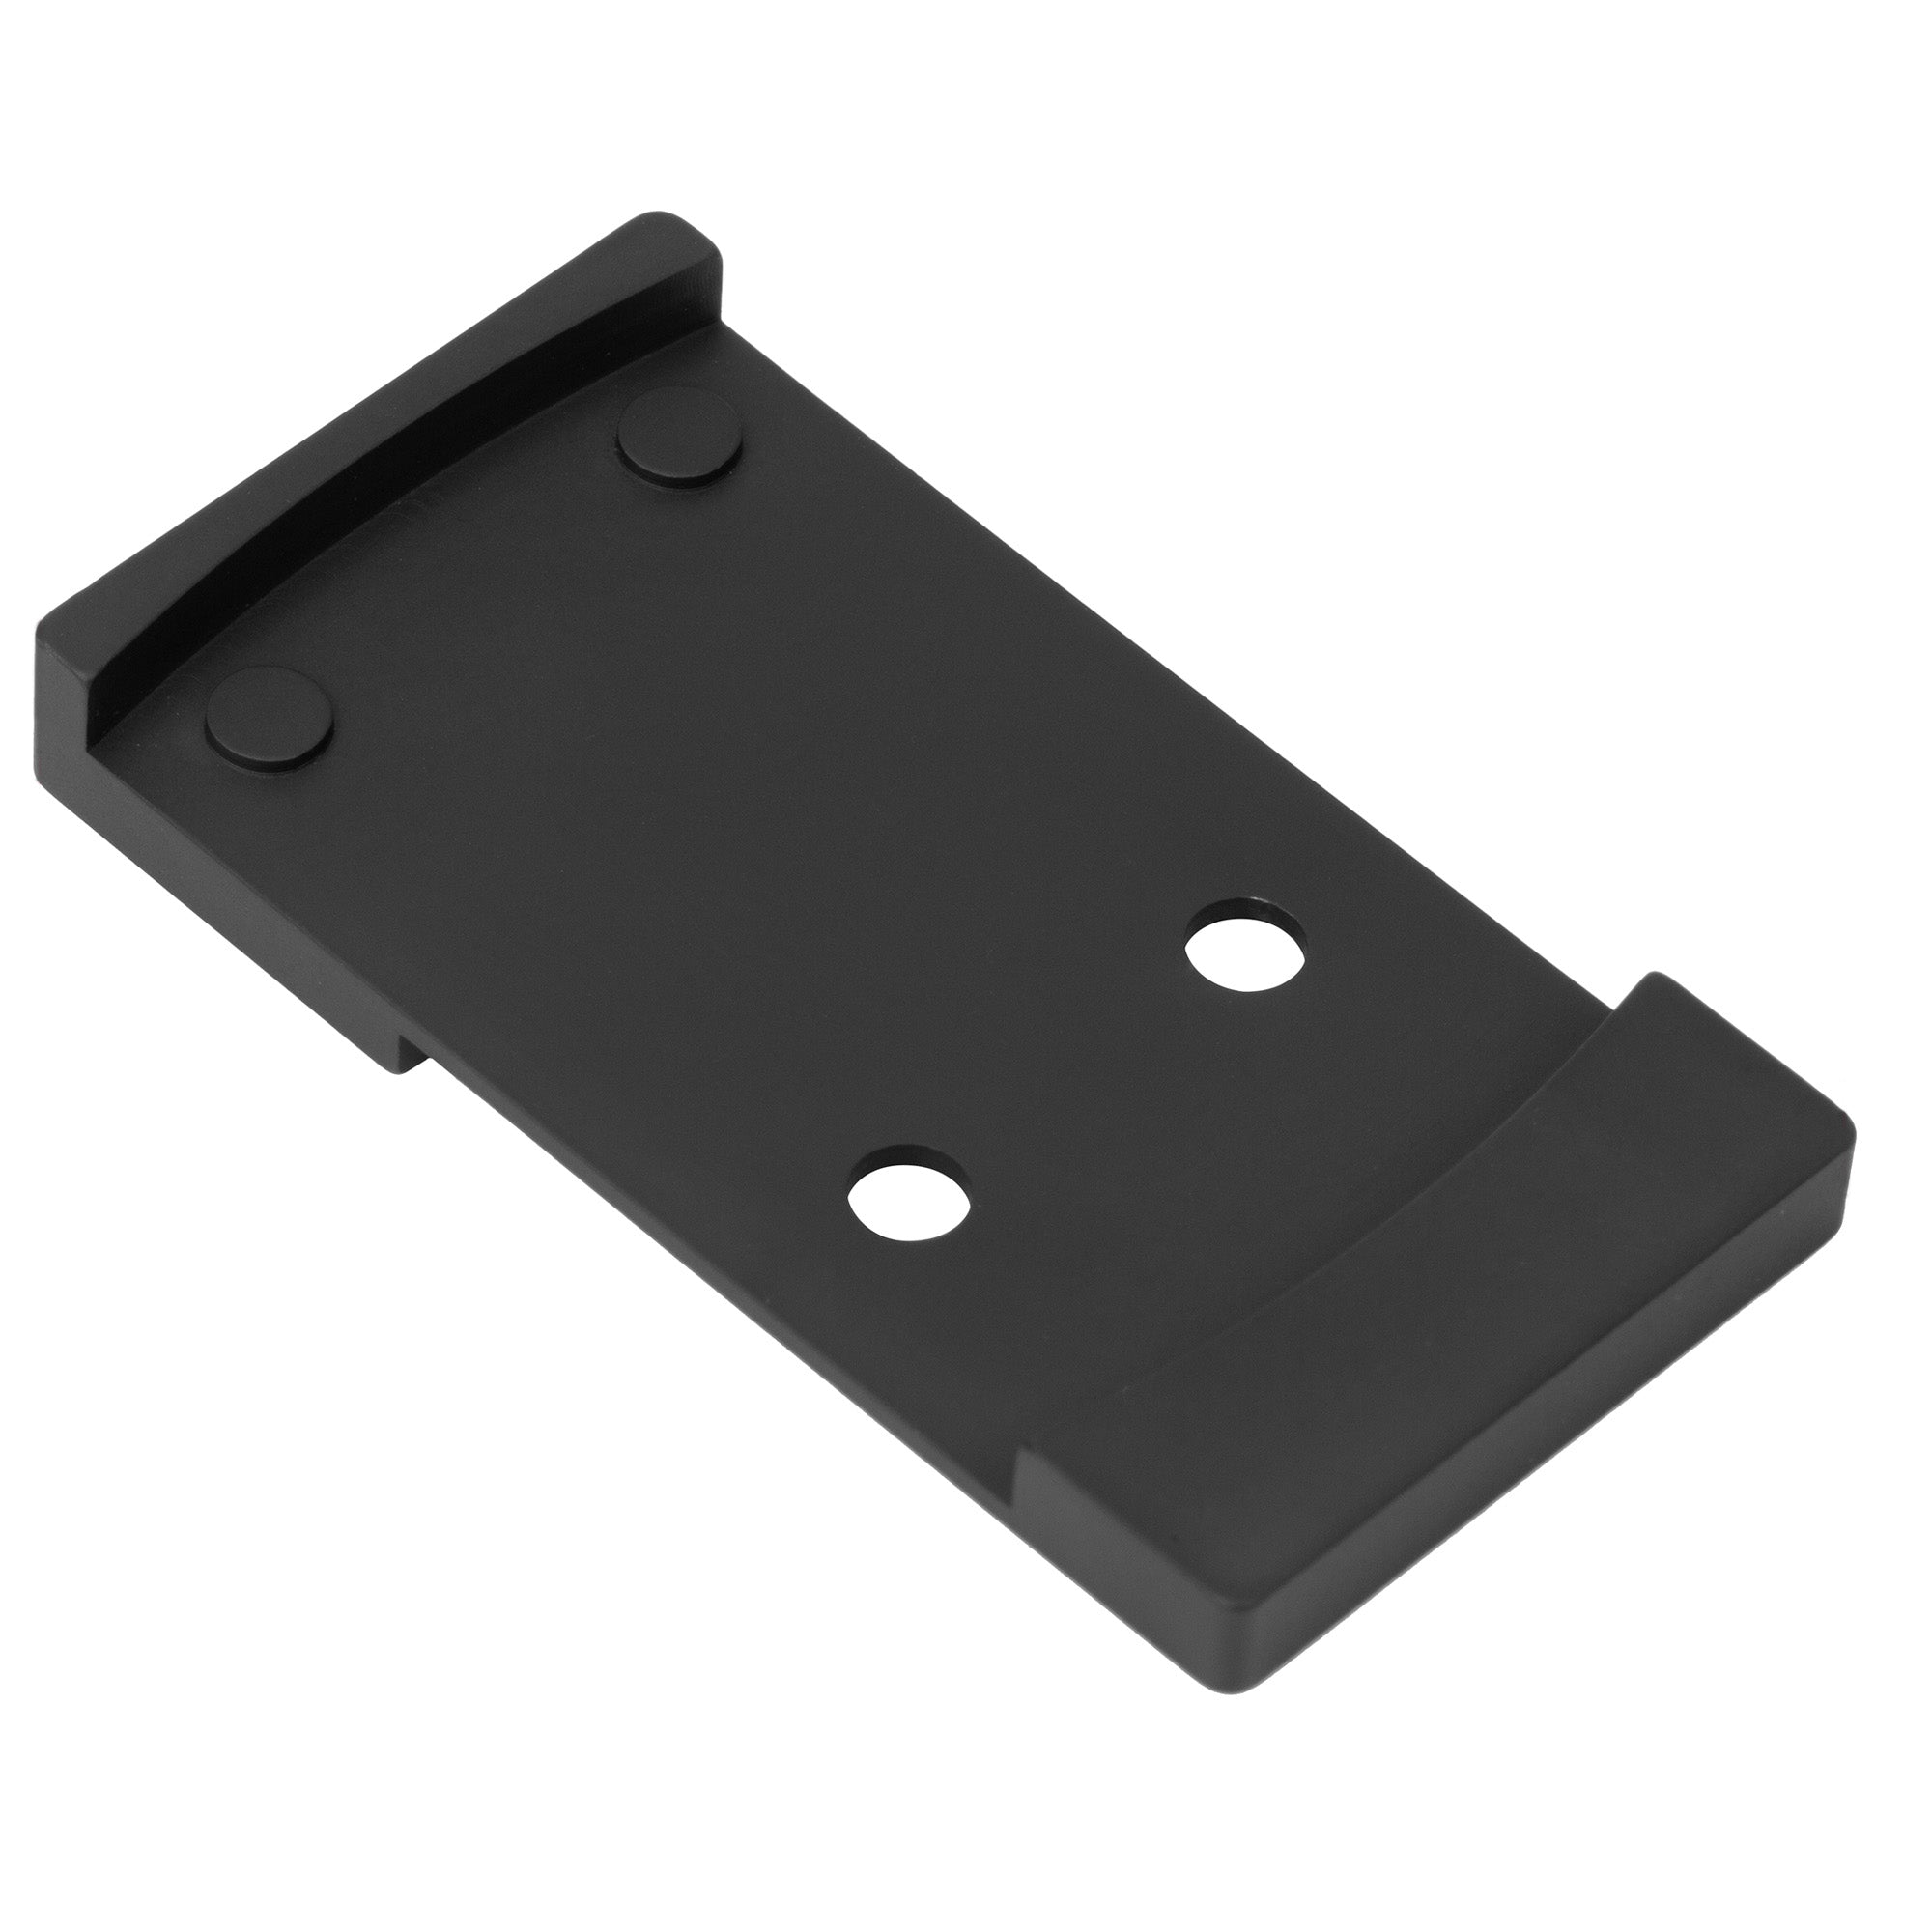 FN 509/510/545 to Holosun 407K/507K/EPS/EPS Carry Adapter Plate - Holosun